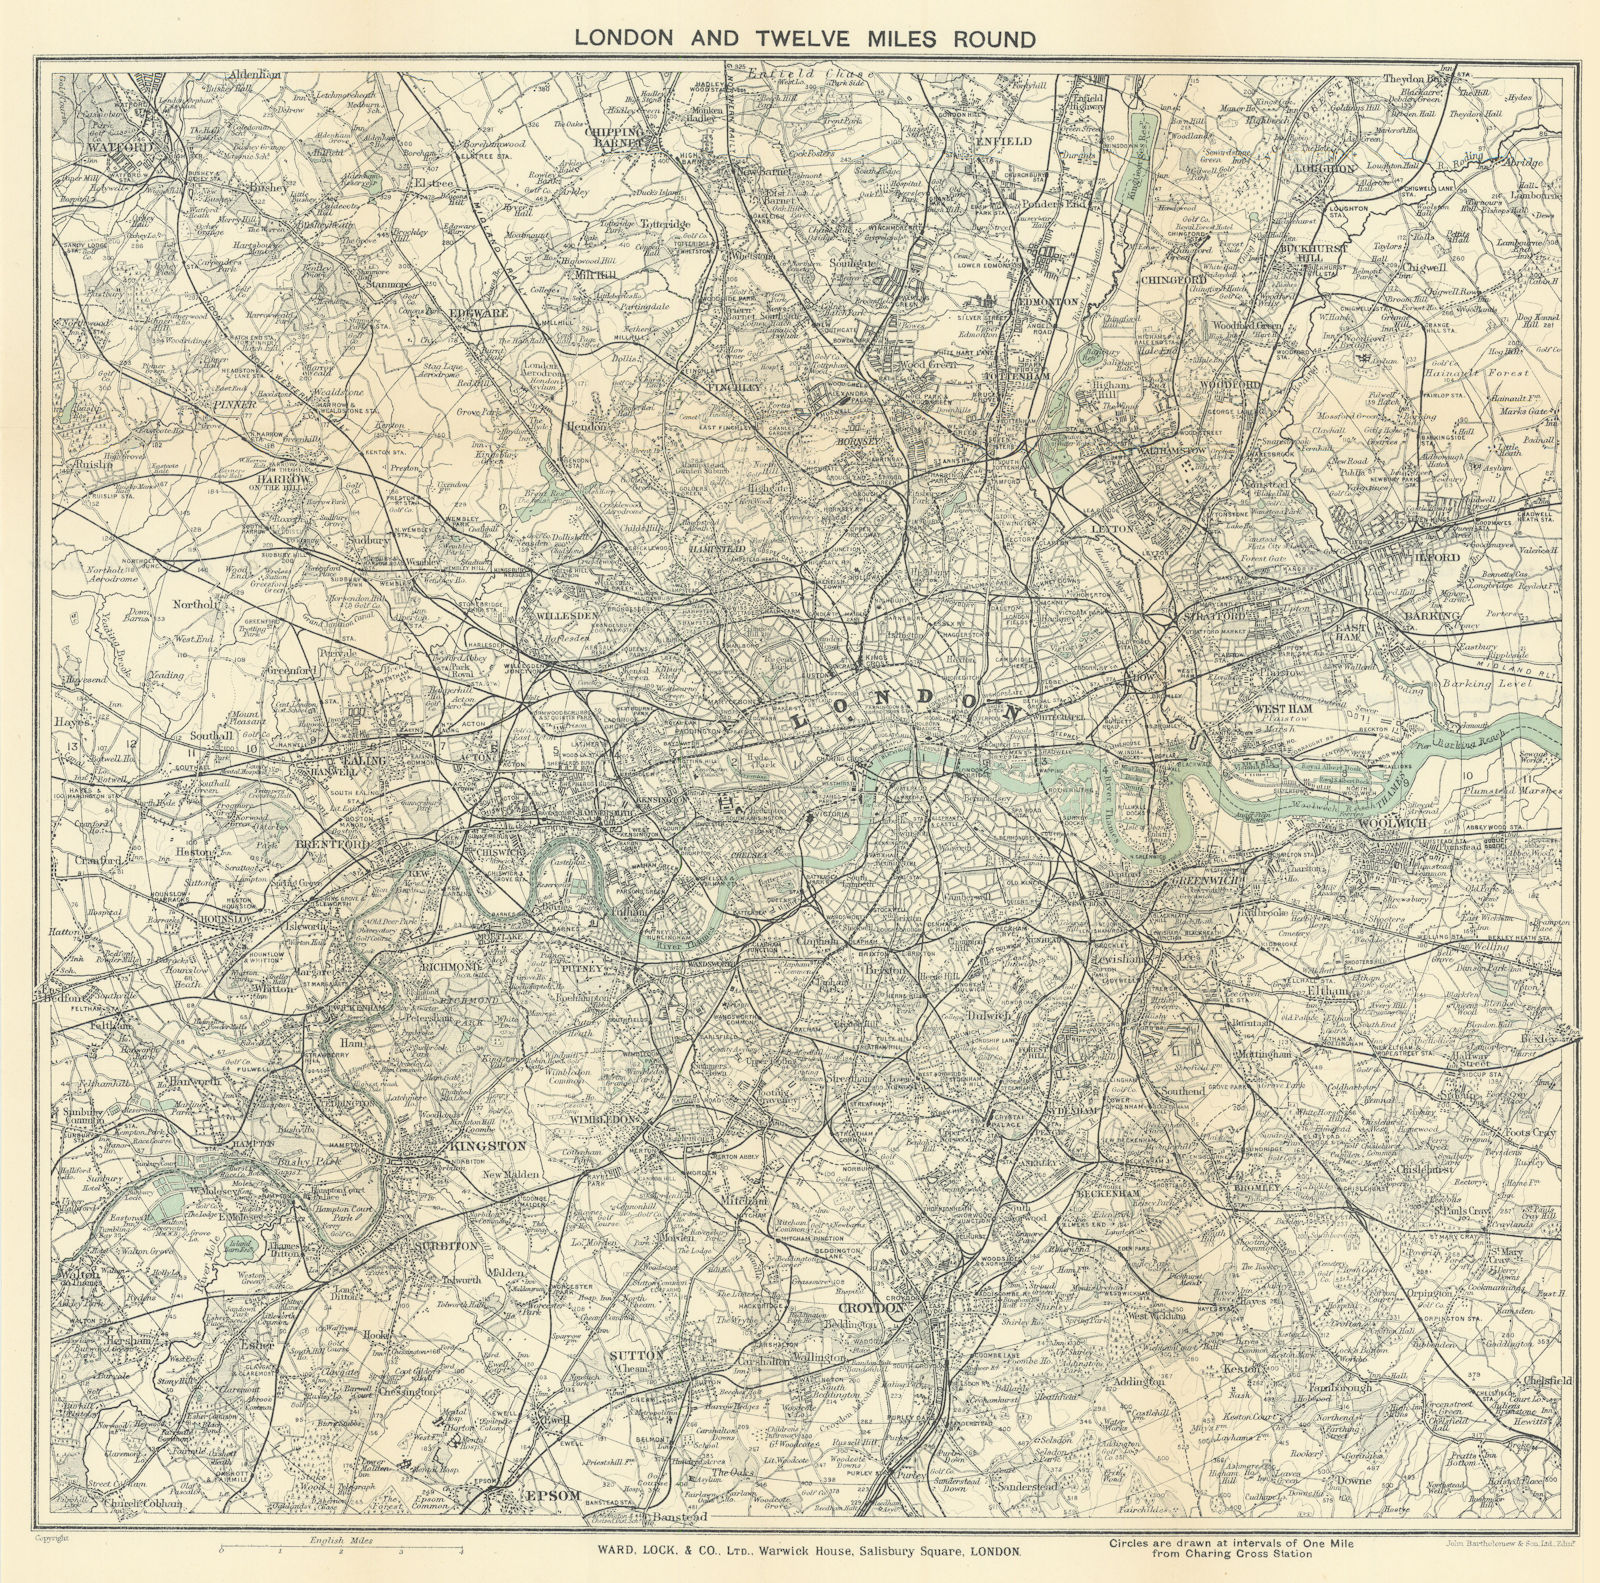 'LONDON AND TWELVE MILES ROUND'. Greater London. WARD LOCK 1921 old map